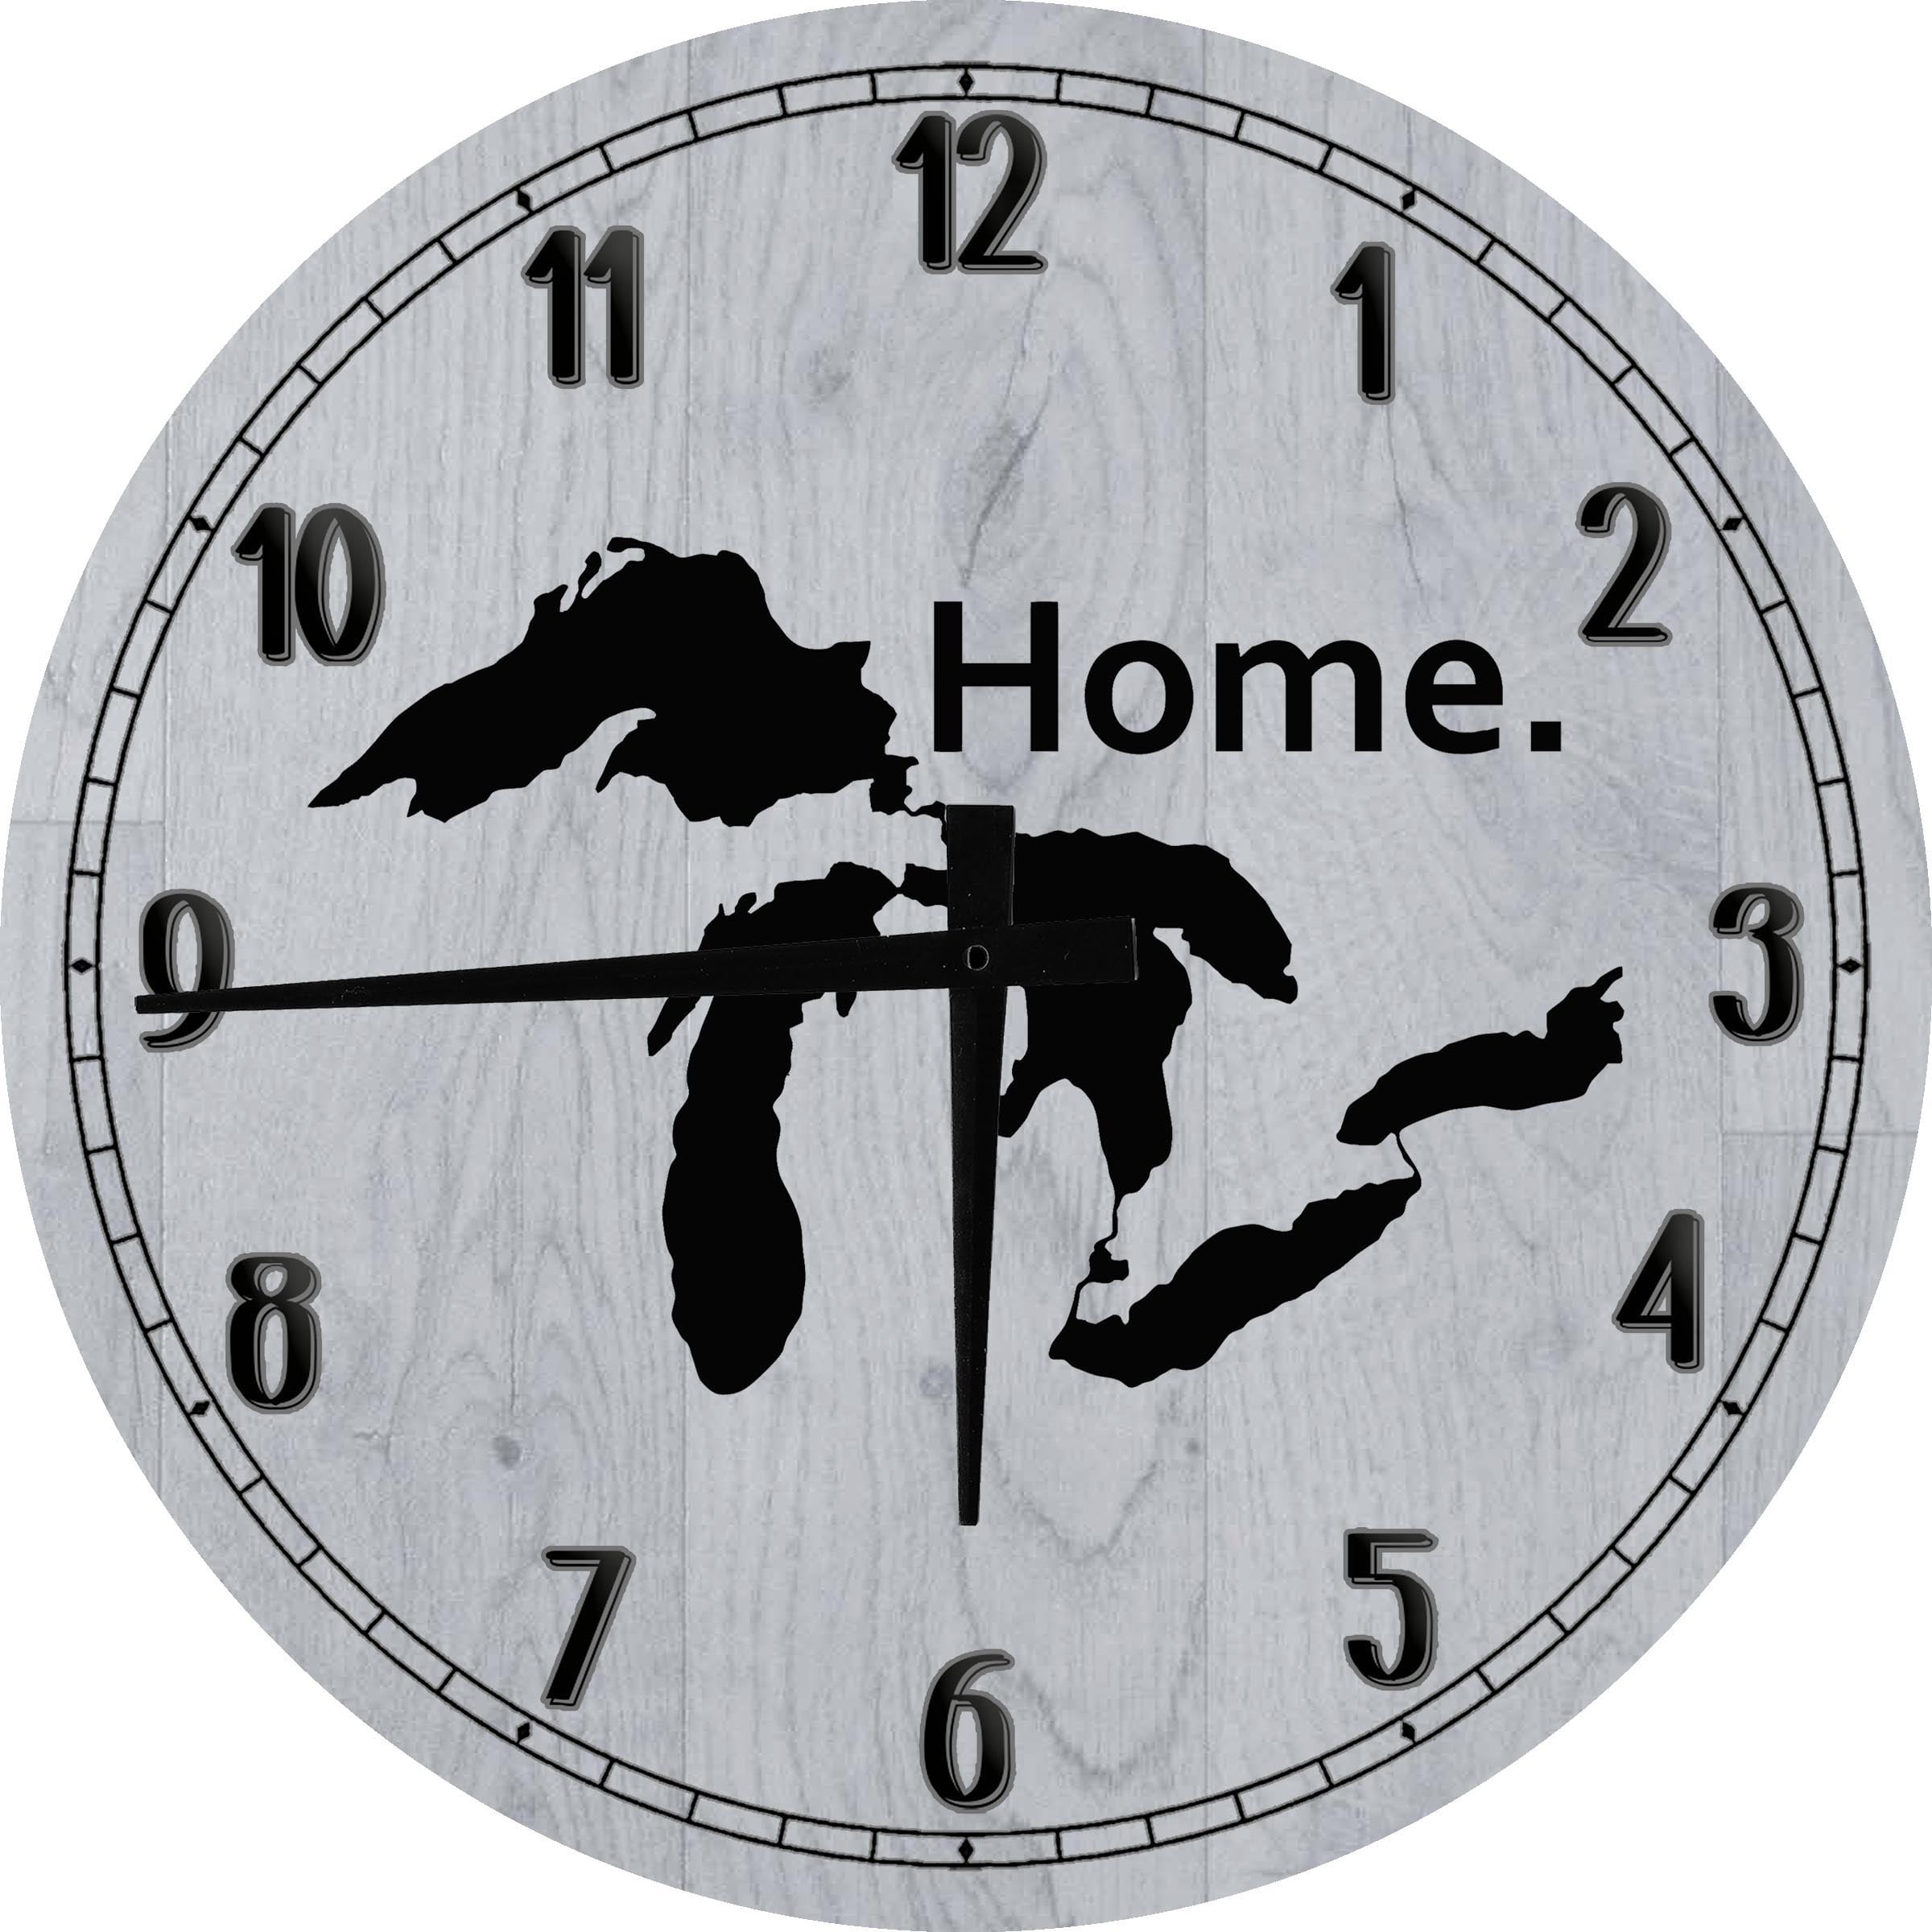 Wood Wall Clock 12 Inch State of Michigan Great Lakes Detroit Home Edition Round Small Battery Operated Gray Art - Walmart.com